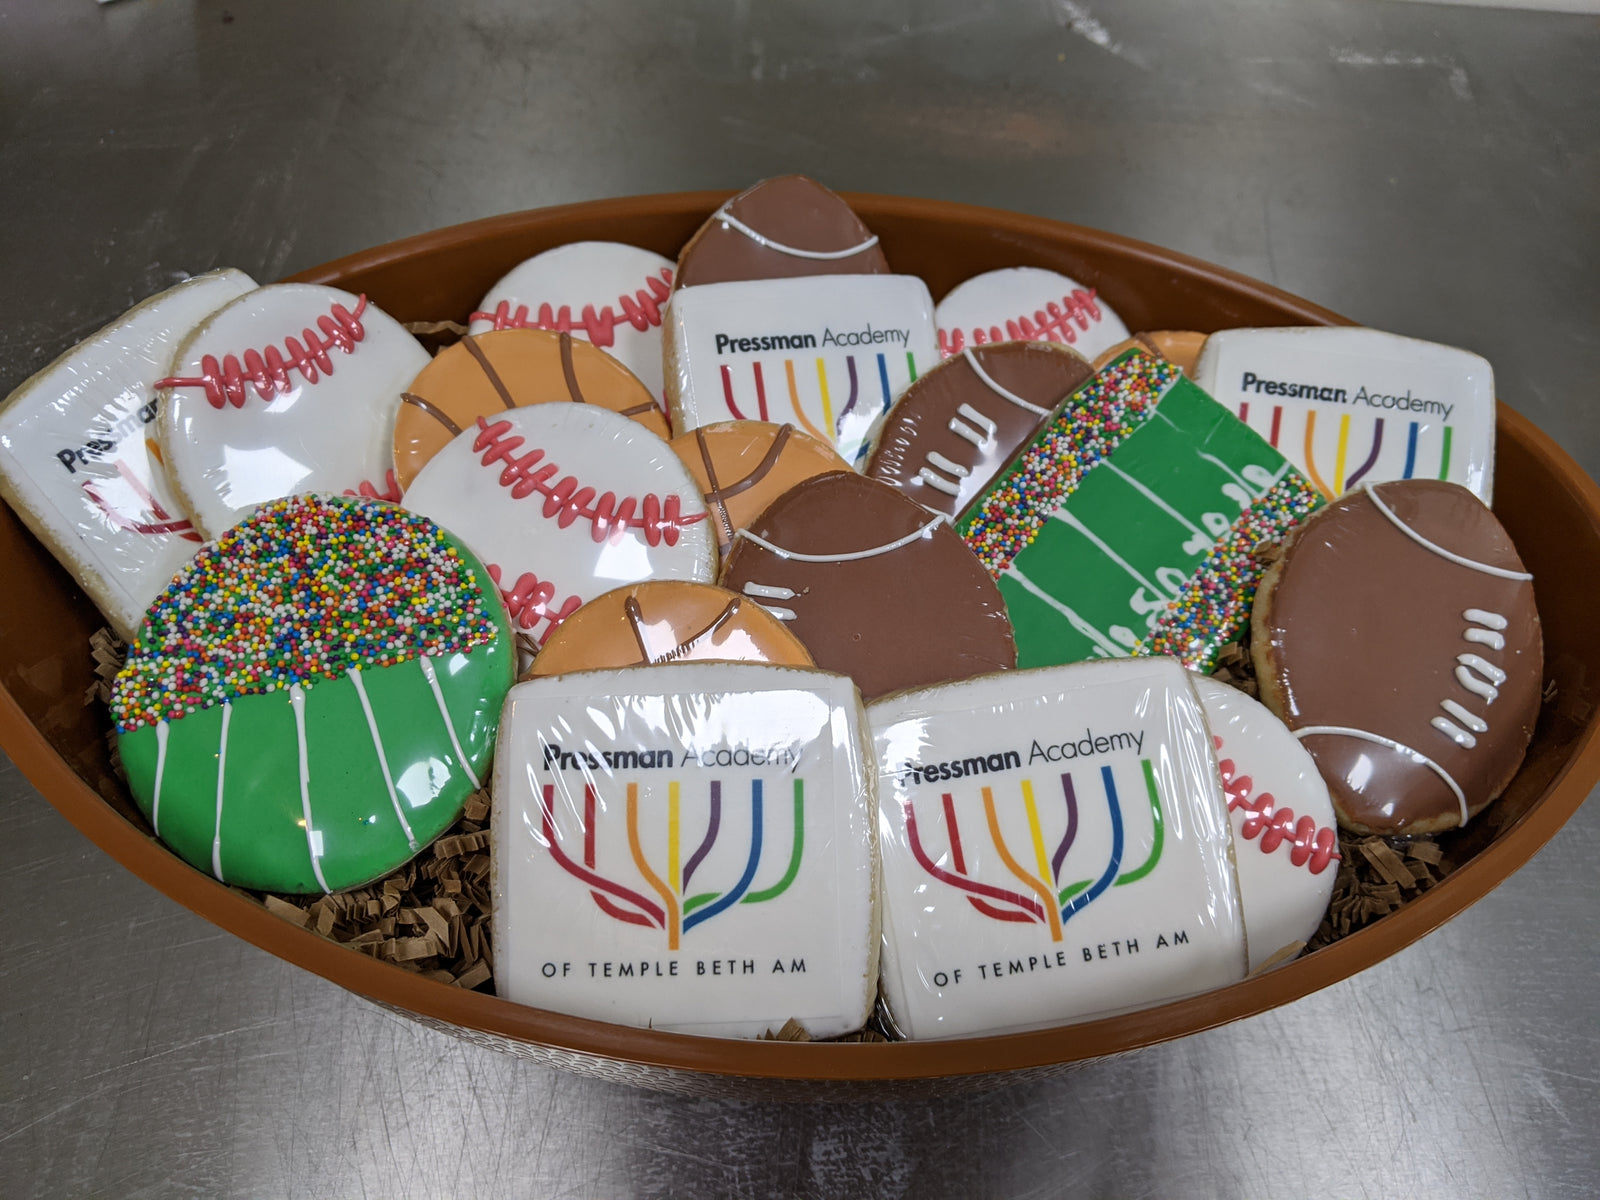 Kosher Cookie Custom Order for Pressman Academy With A variety of cookies in a bowl